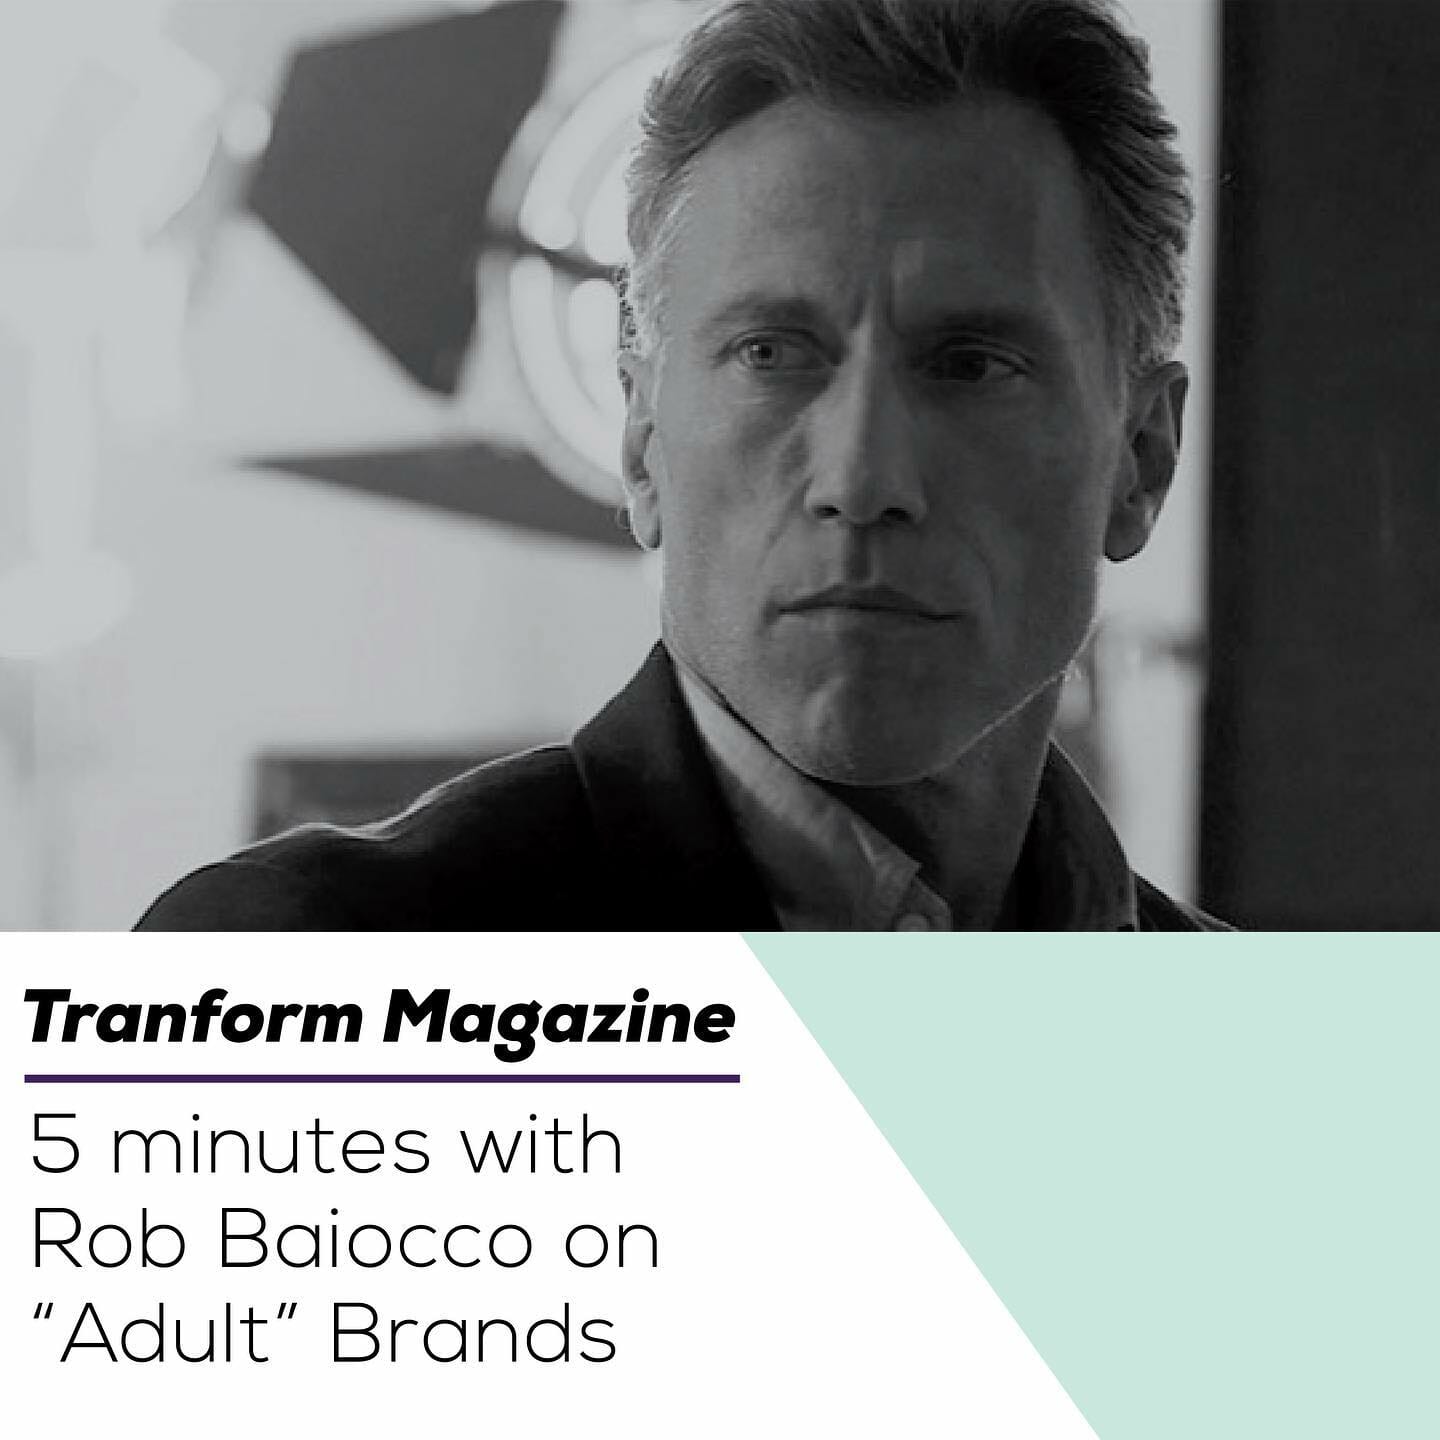 “Who doesn’t want to work with Spirits and Cannabis?”  Our Co-founder and CCO Rob Baiocco tells us what it’s like to work on brands like these and much more in this interview with @transform_magazine.  Read the full article in #linkinbio 
.
.
.
.
#adagency #brand #marketing #thebamconnection #advertisement #transformmagazine